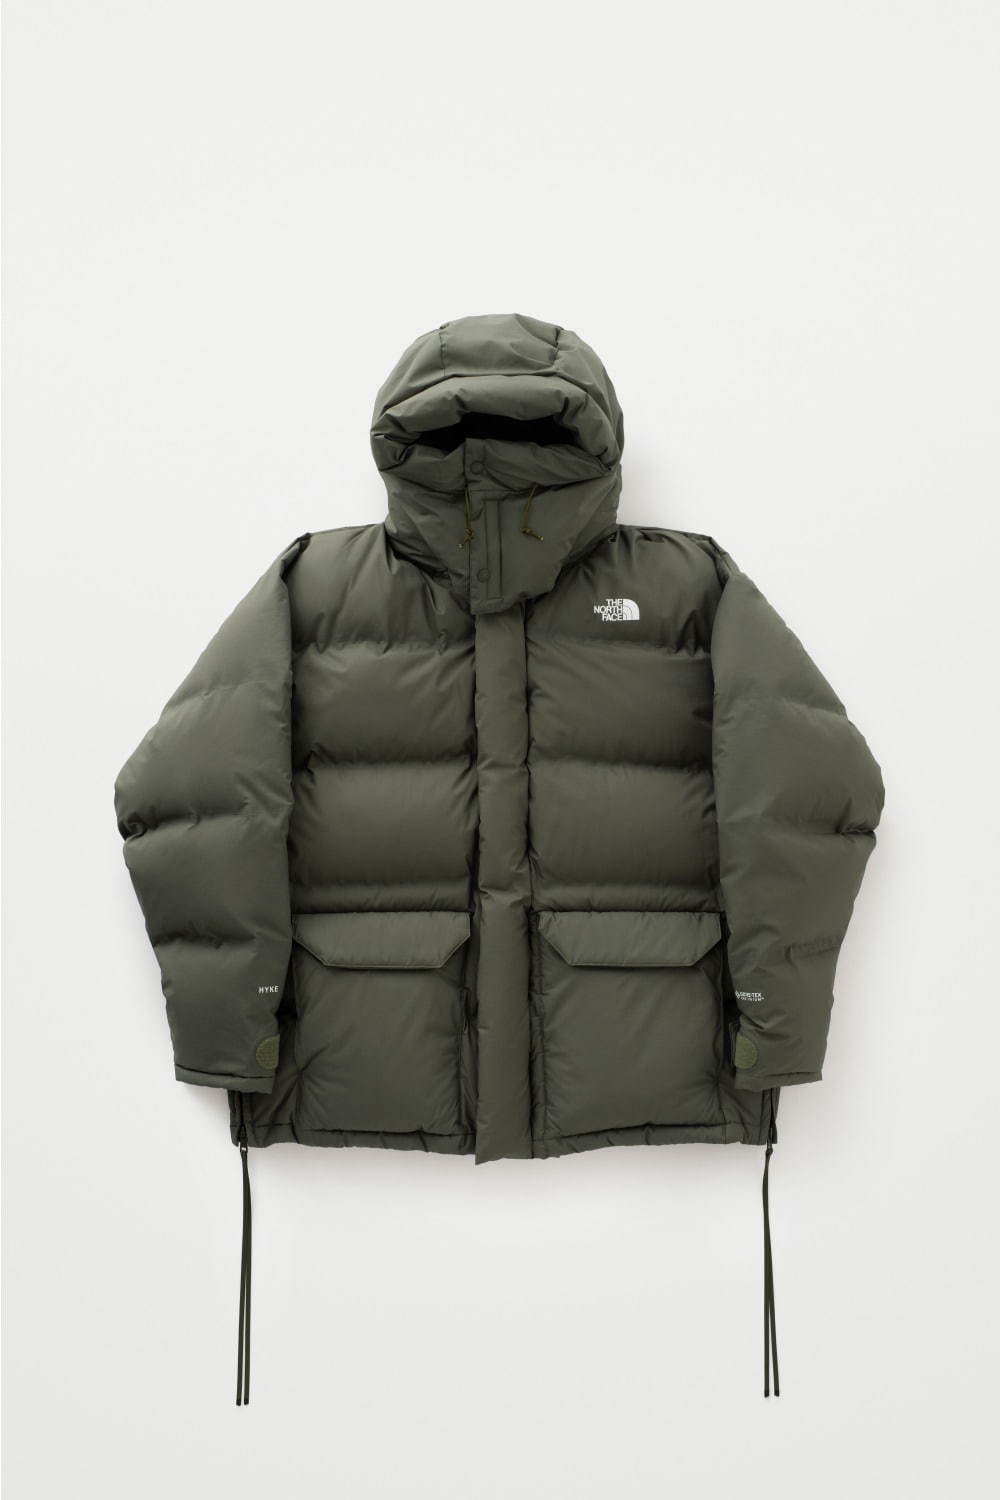 THE NORTH FACE×HYKE